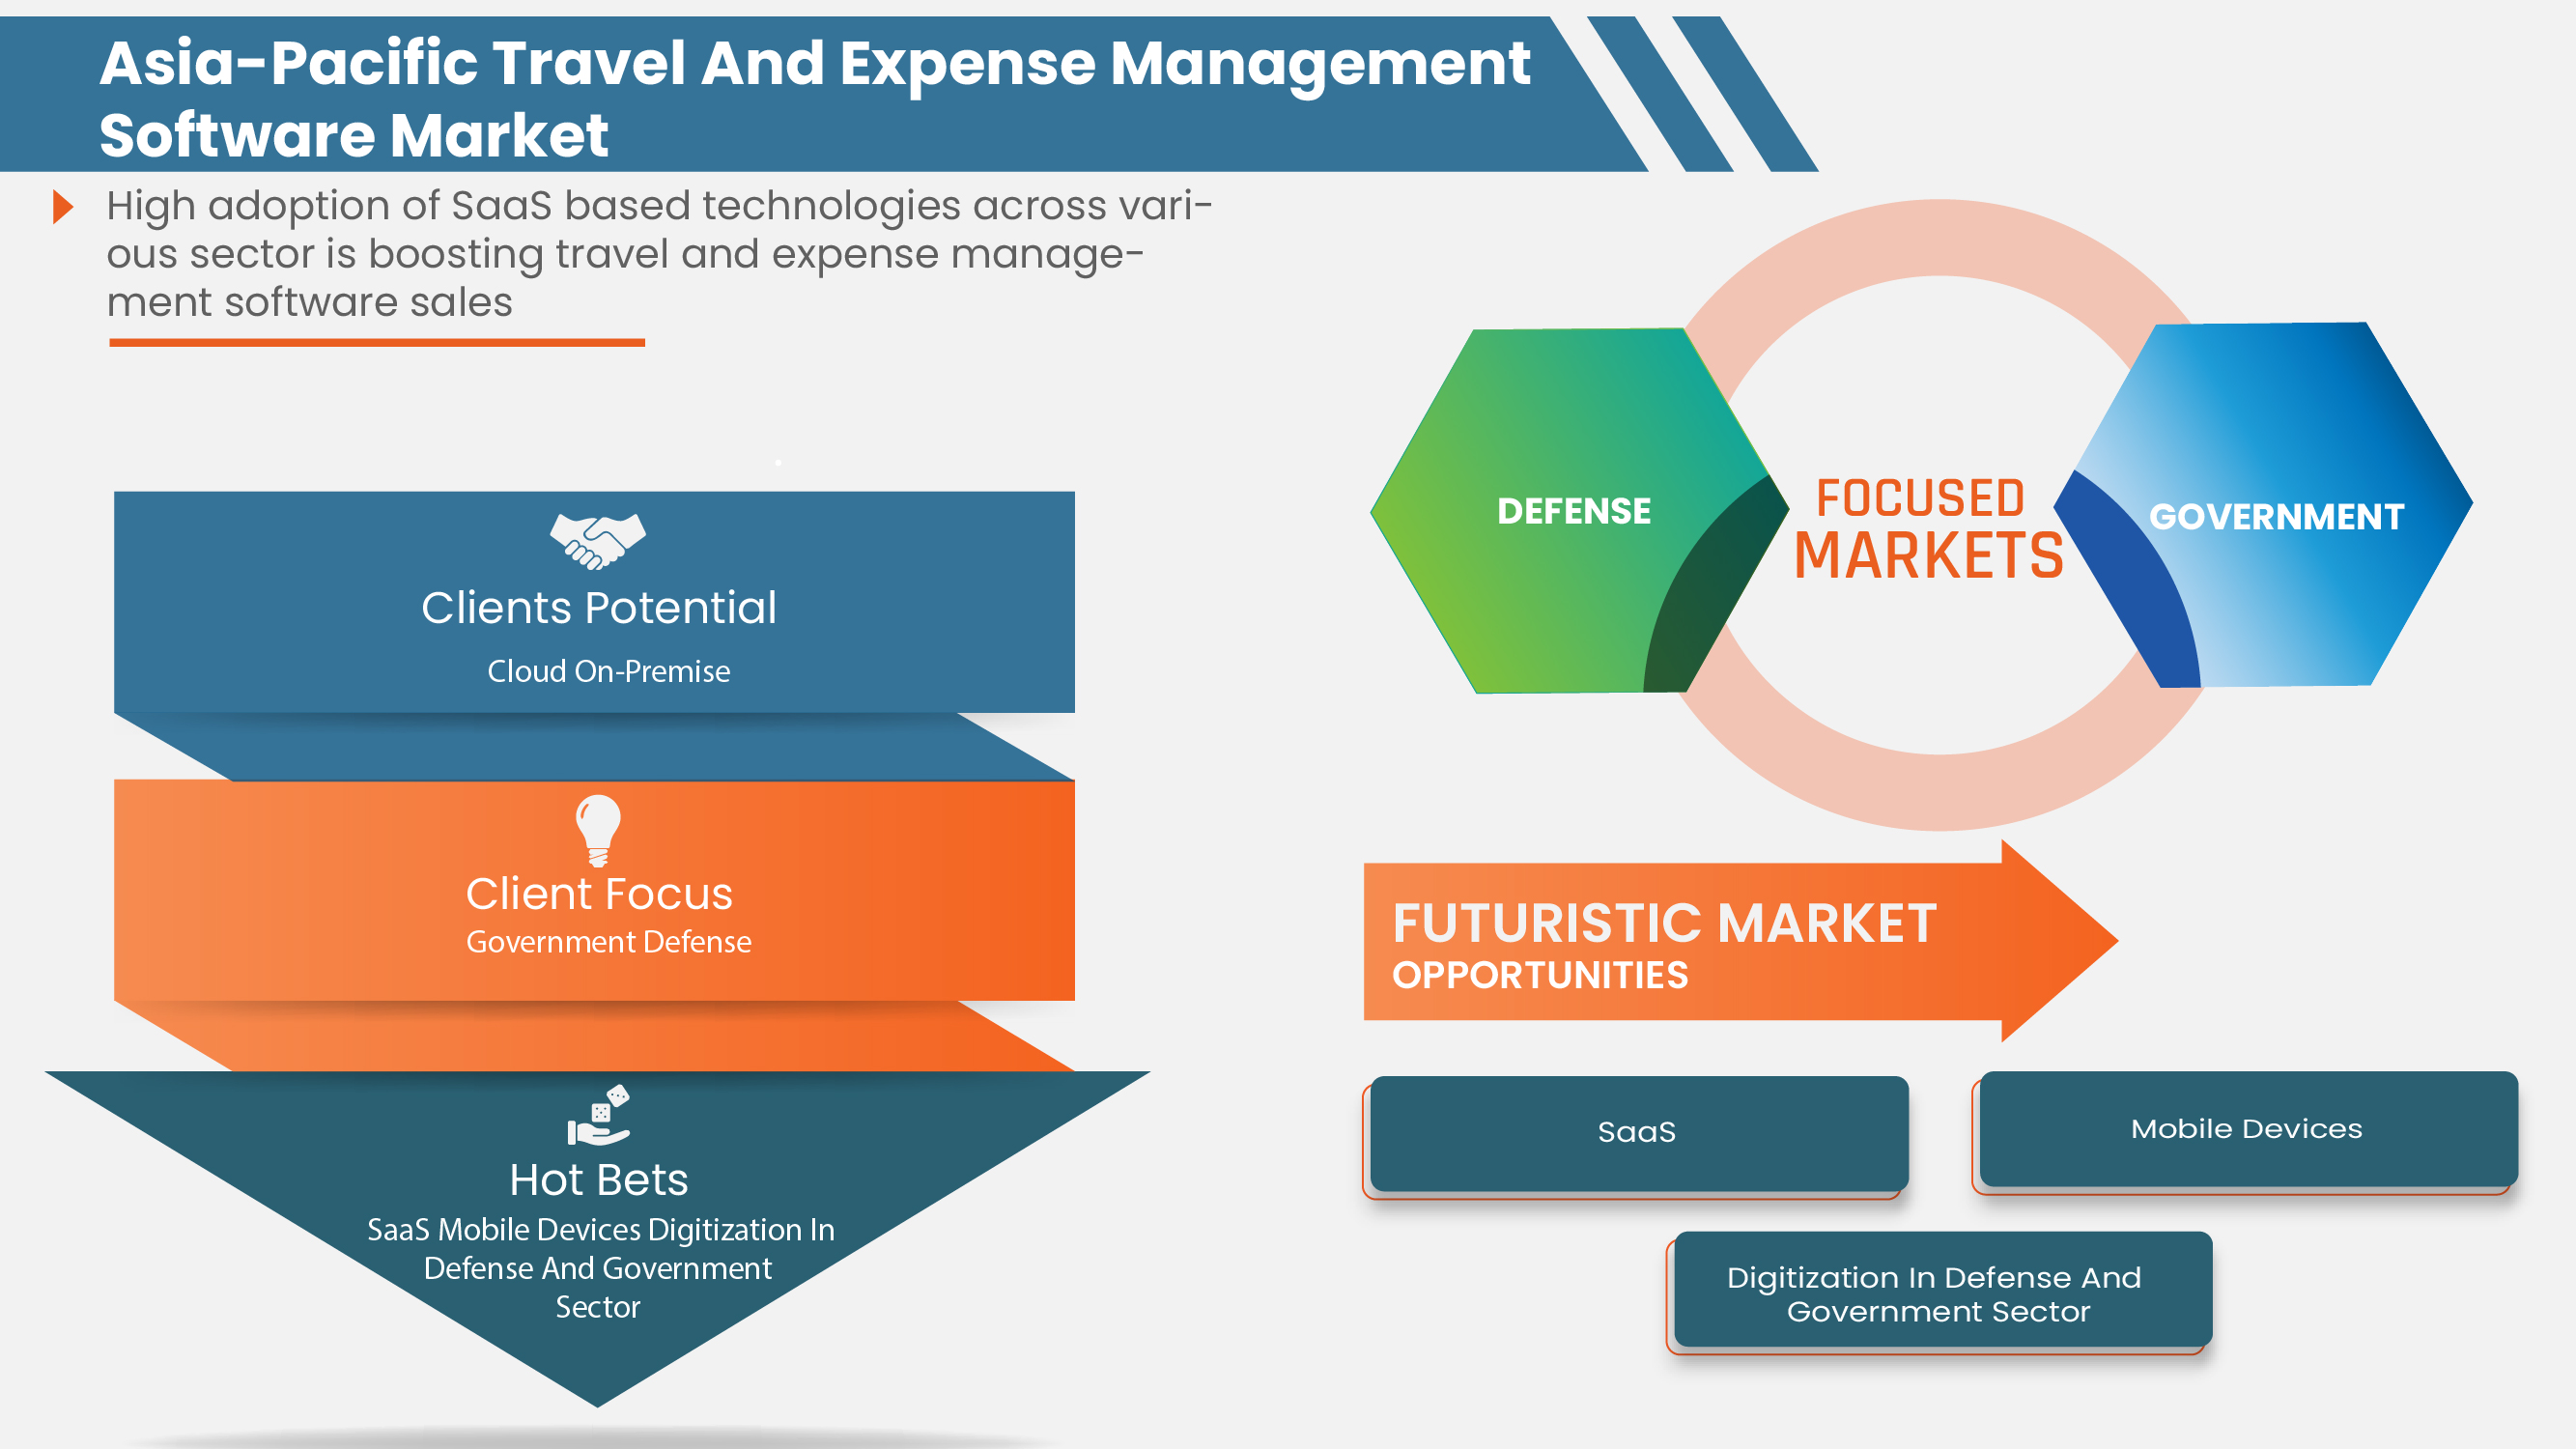 Asia-Pacific Travel and Expense Management Software Market